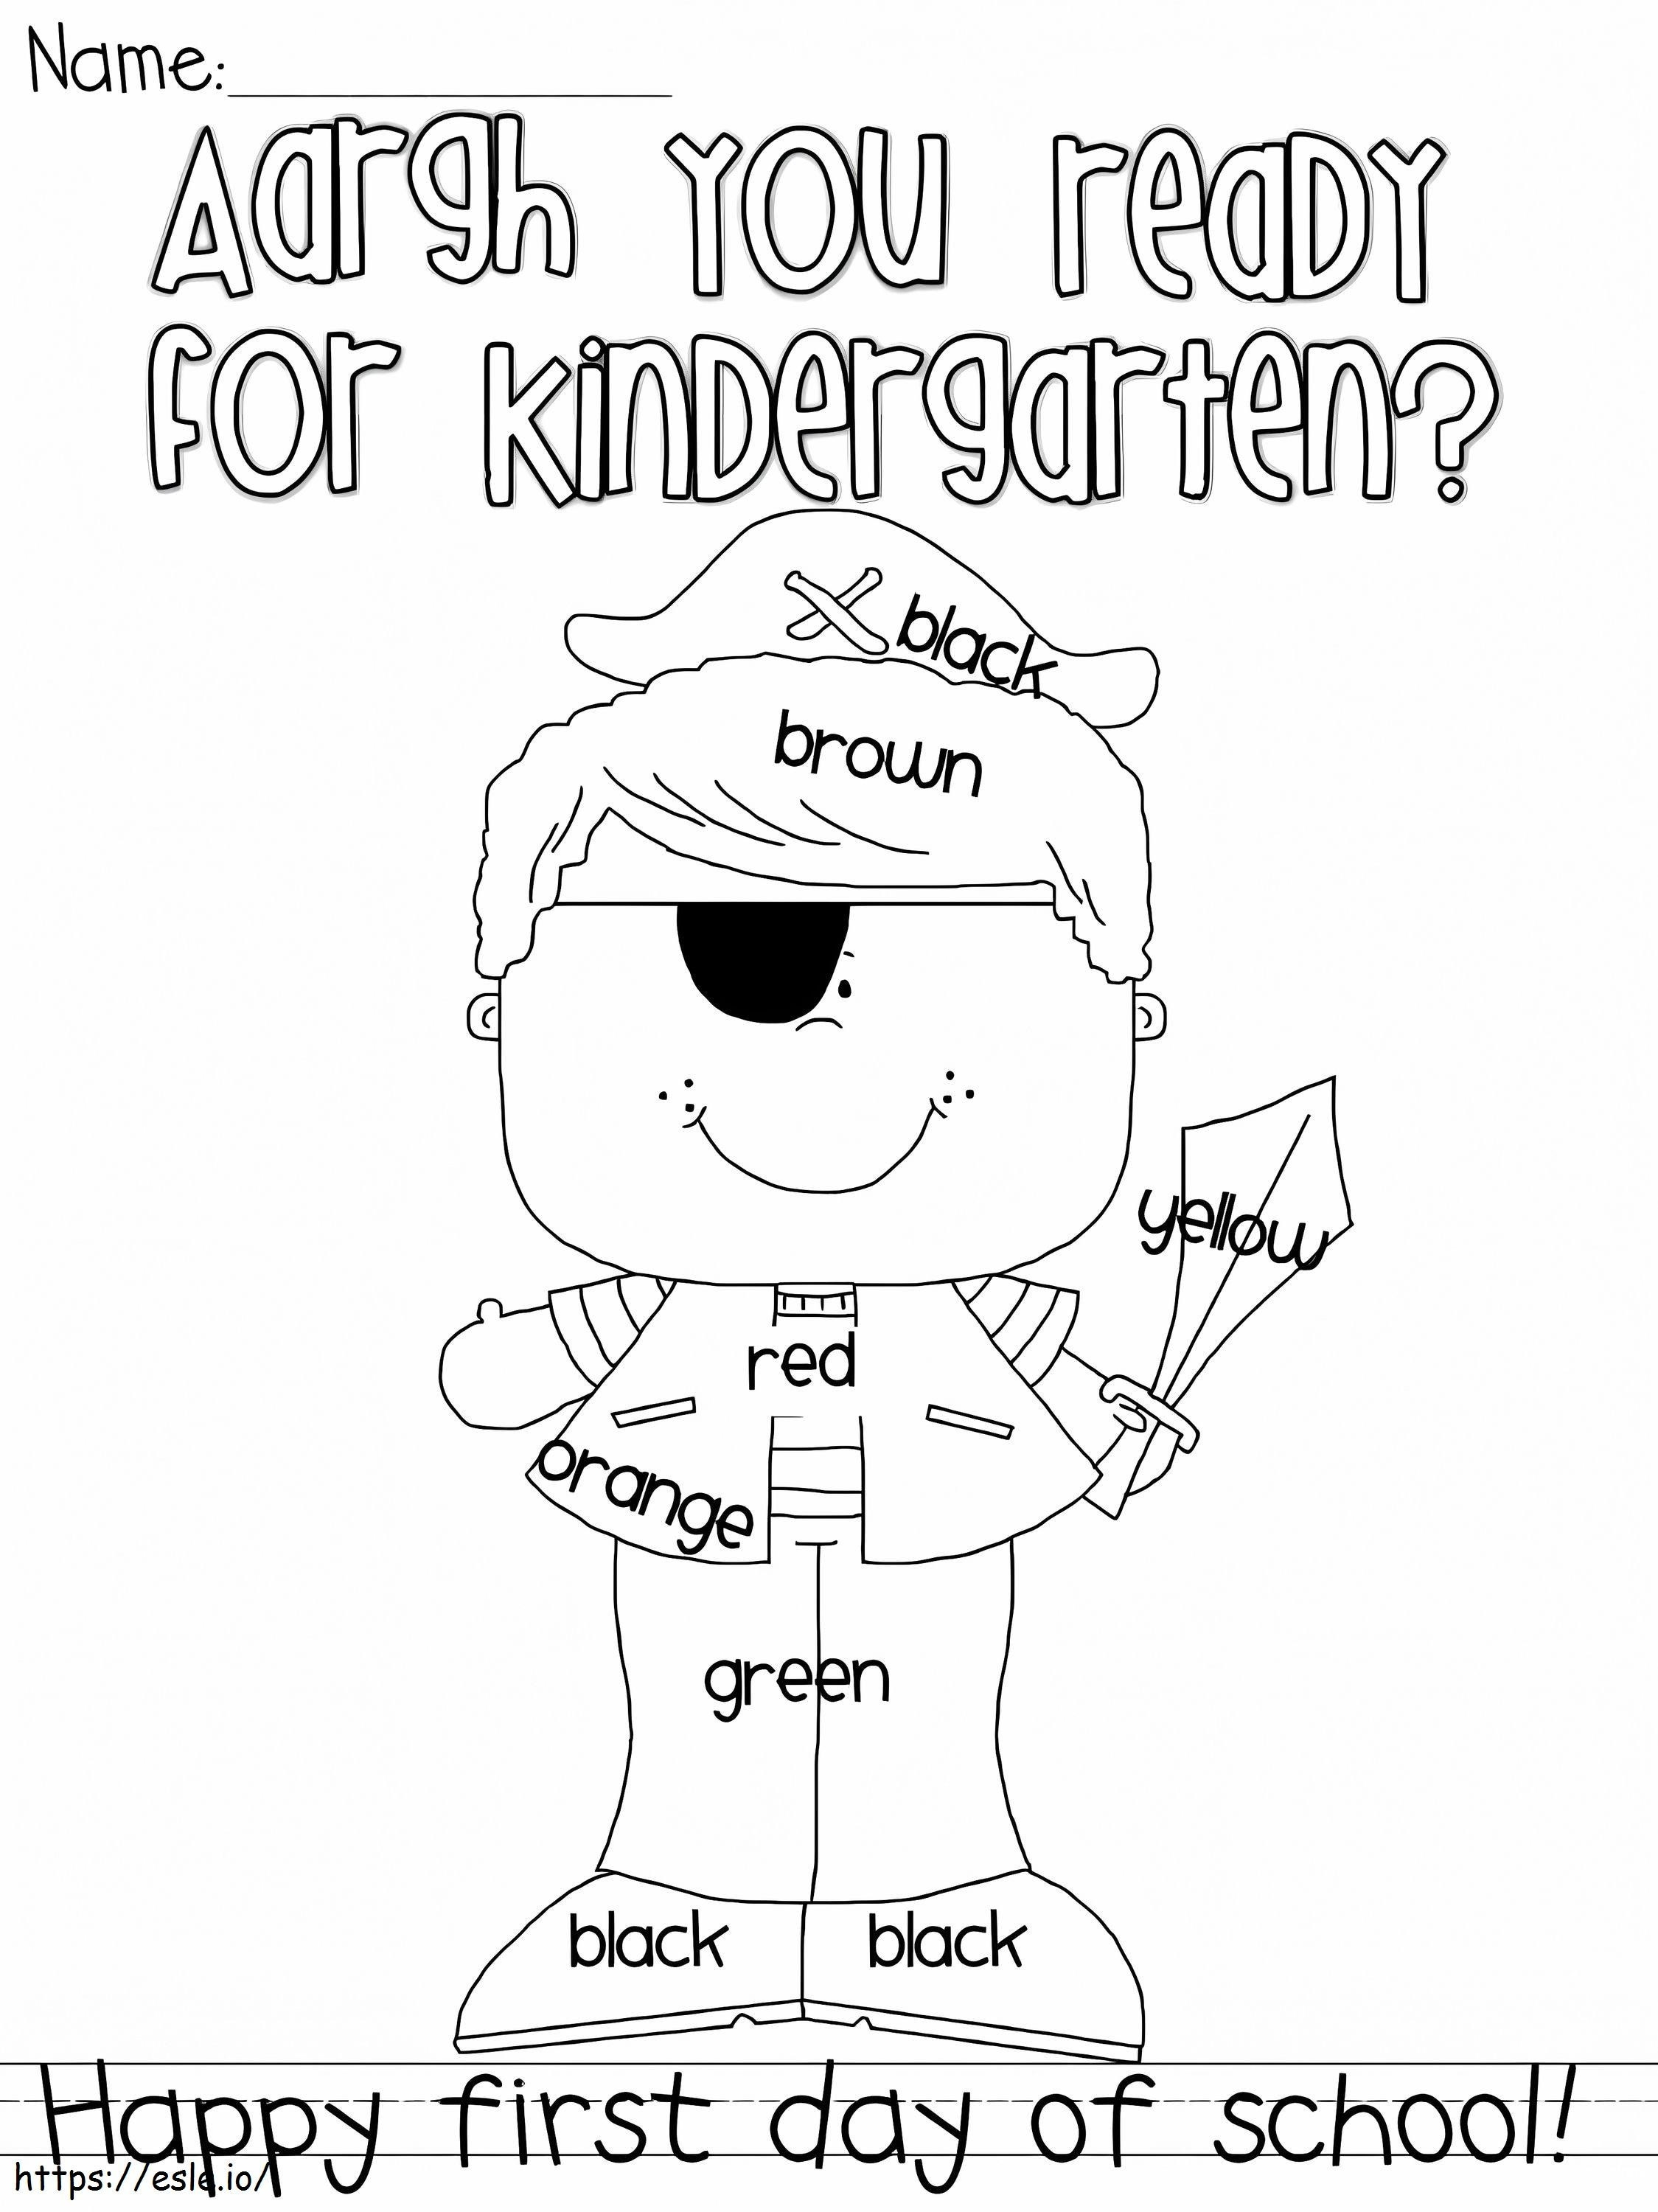 Happy First Day Of School coloring page